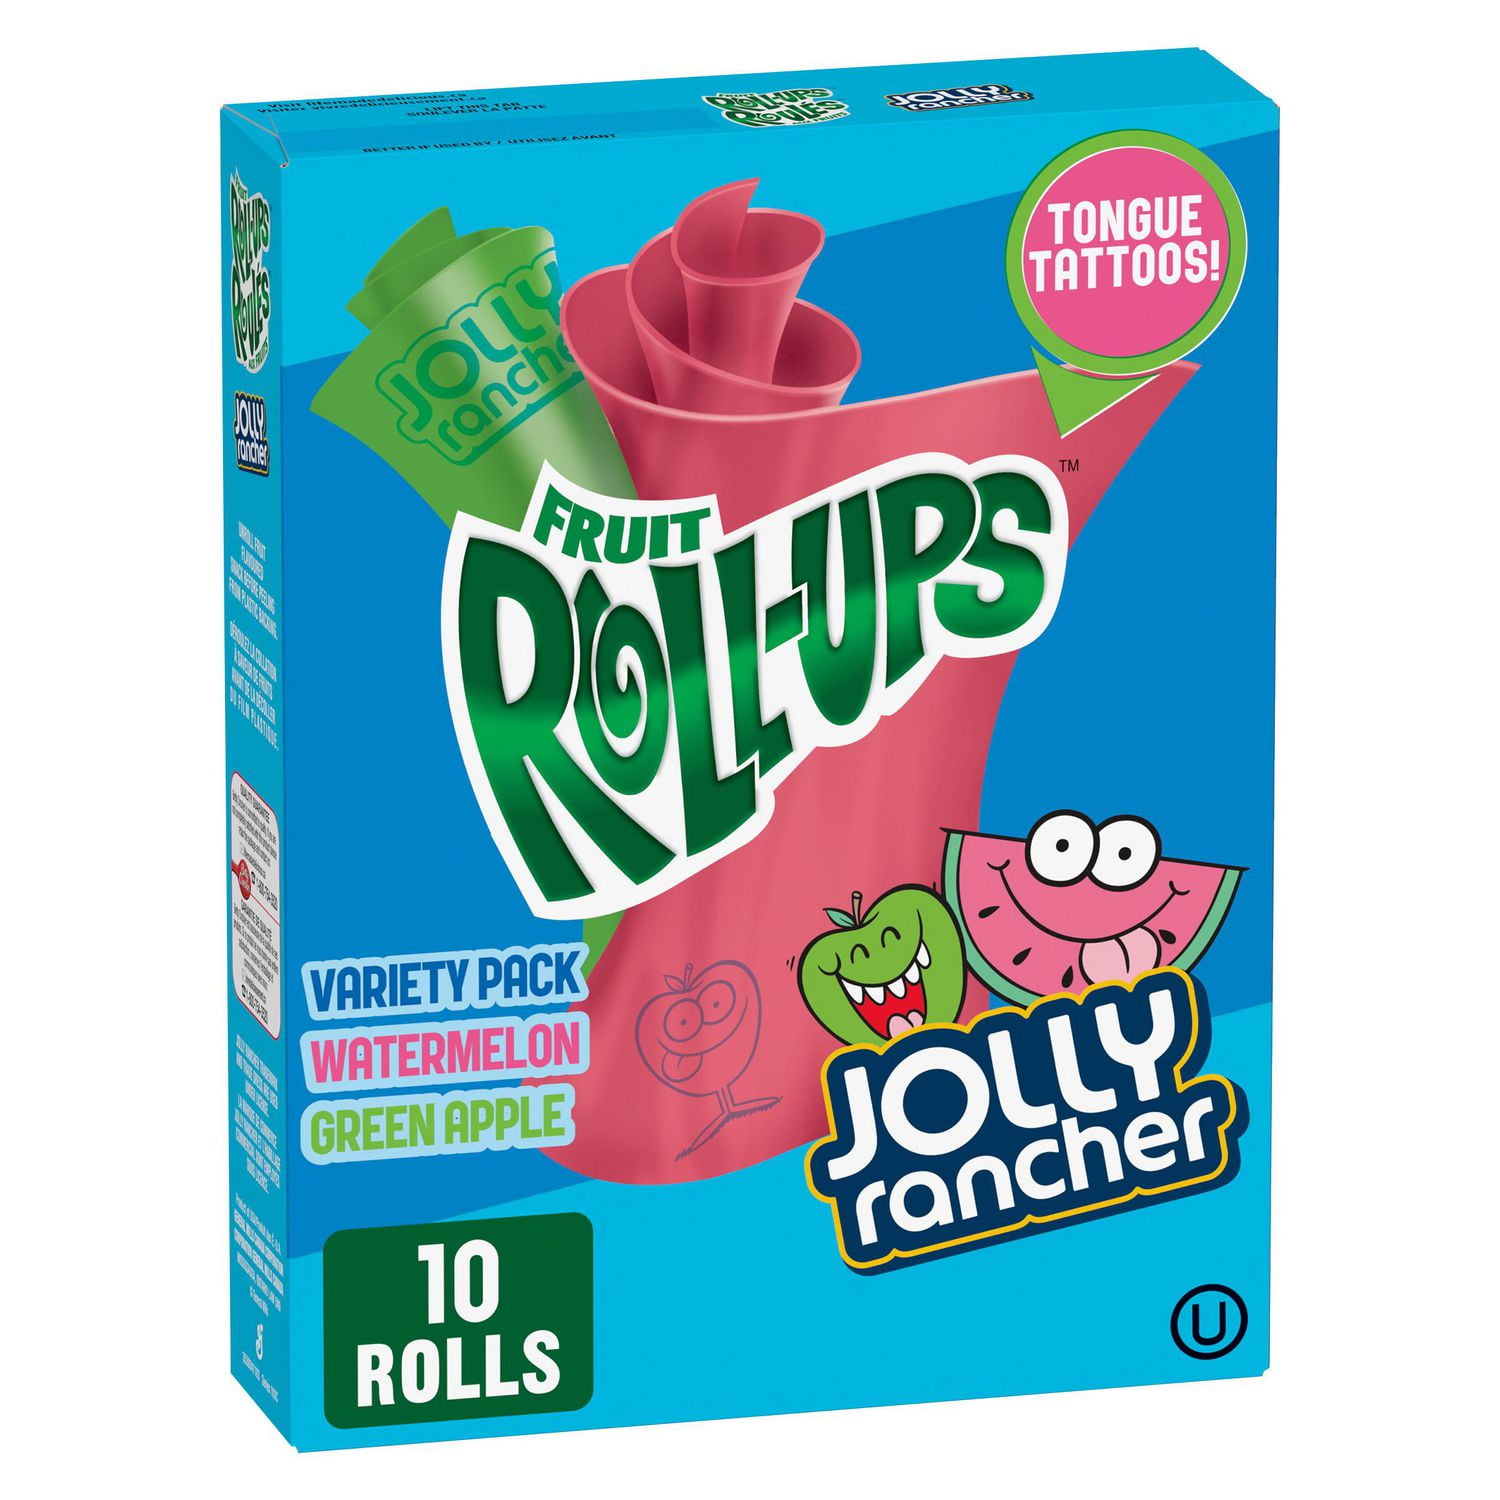 Fruit RollUps Has New Unicorn Tongue Tattoos to Channel Your 90s Soul